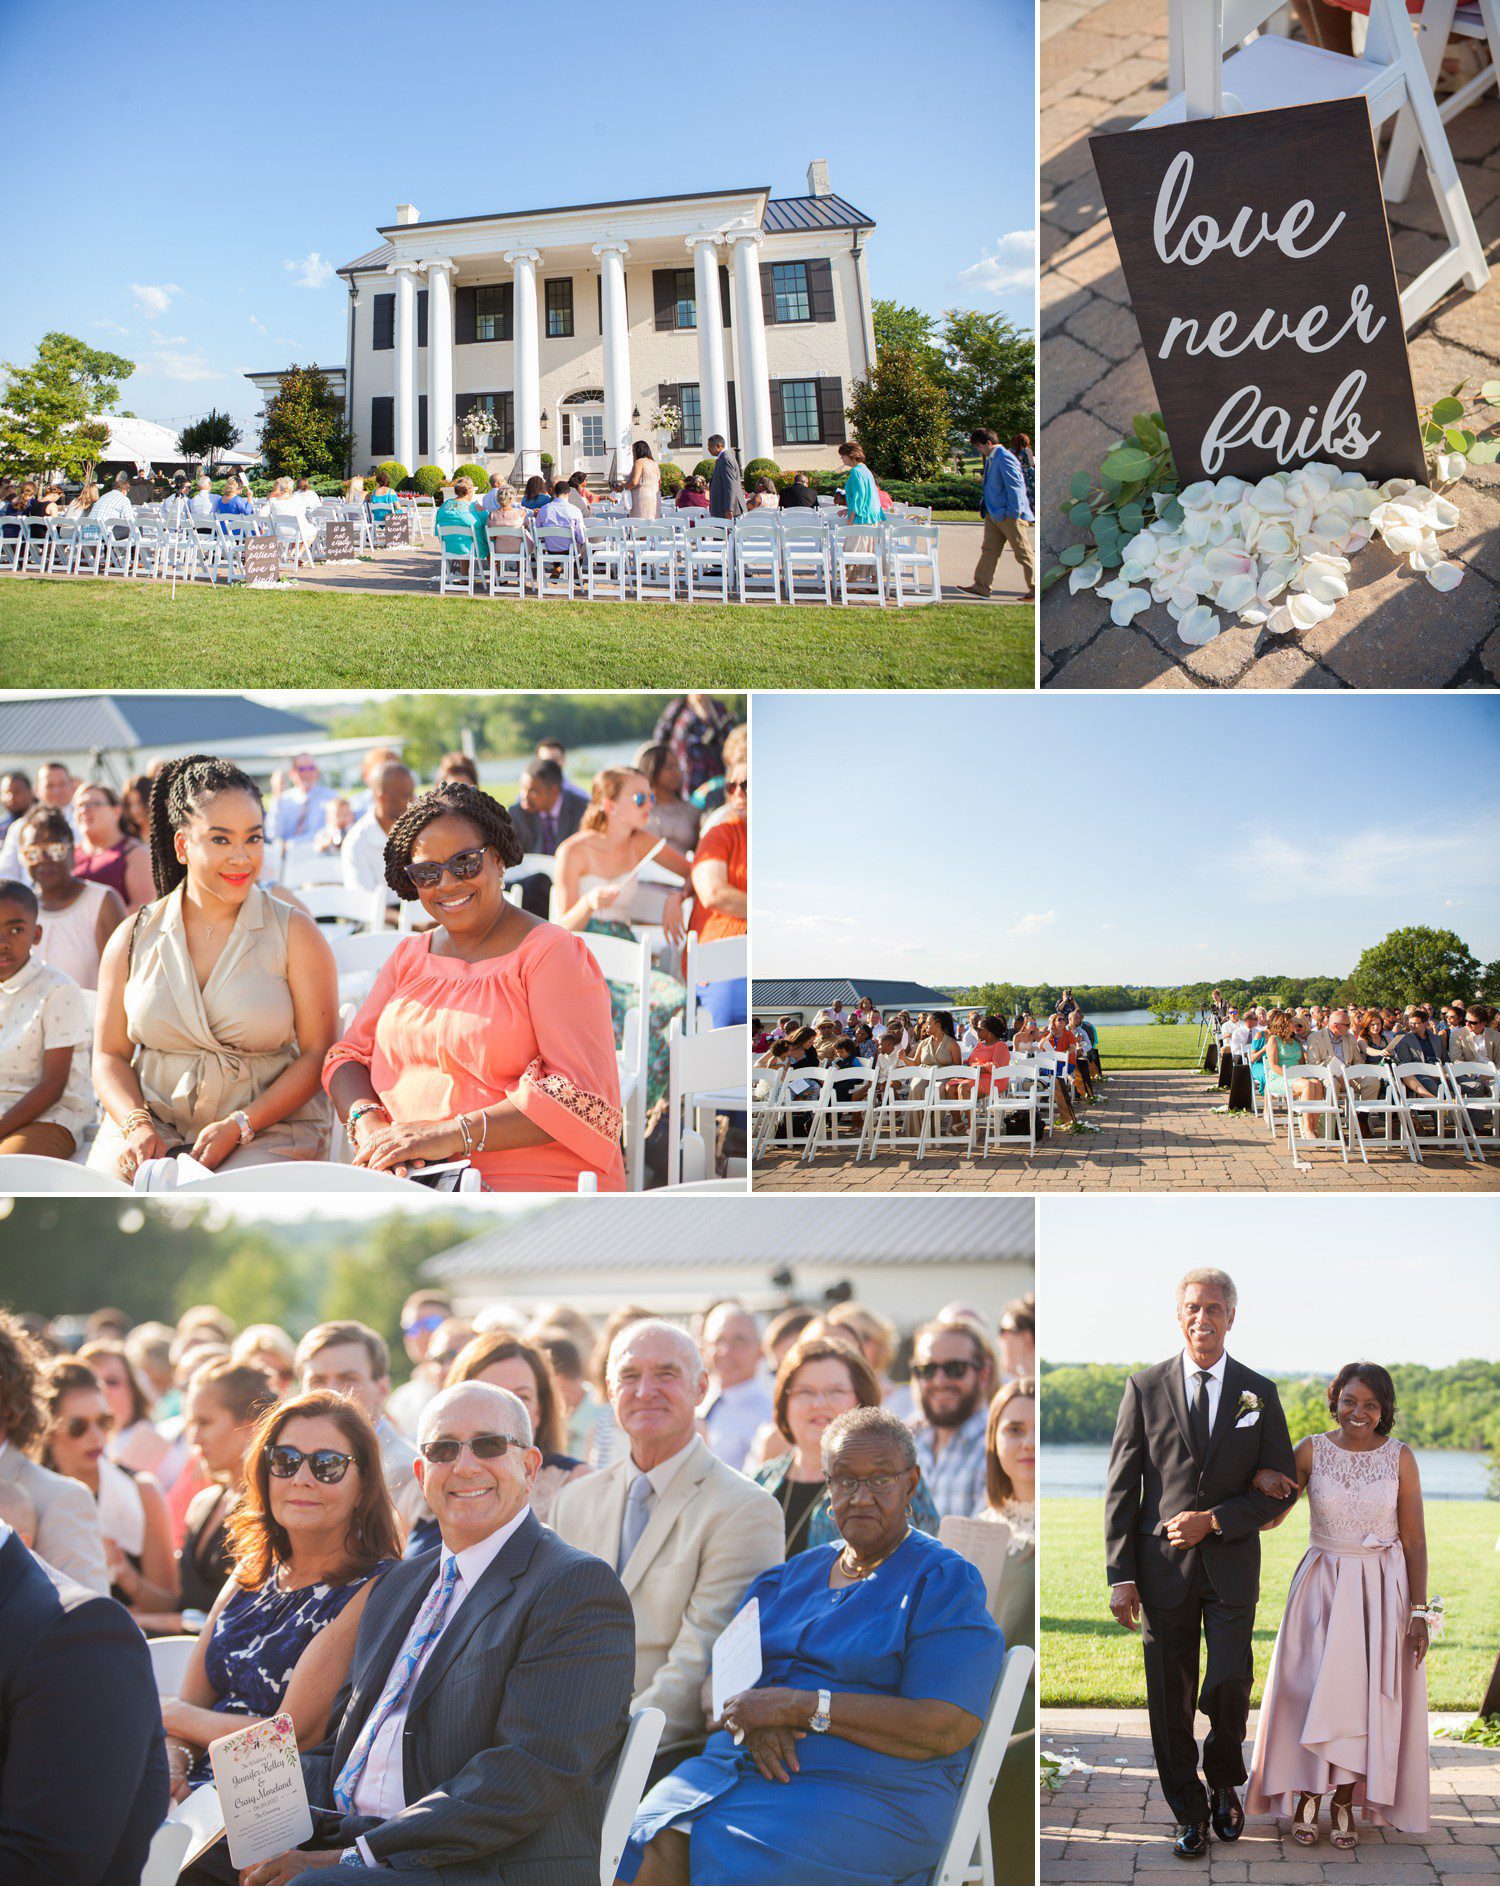 Summer ceremony at Beautiful summer wedding at Foxland Harbor in Gallatin, TN overlooking Old Hickory Lake. Wedding photos by Krista Lee Photography